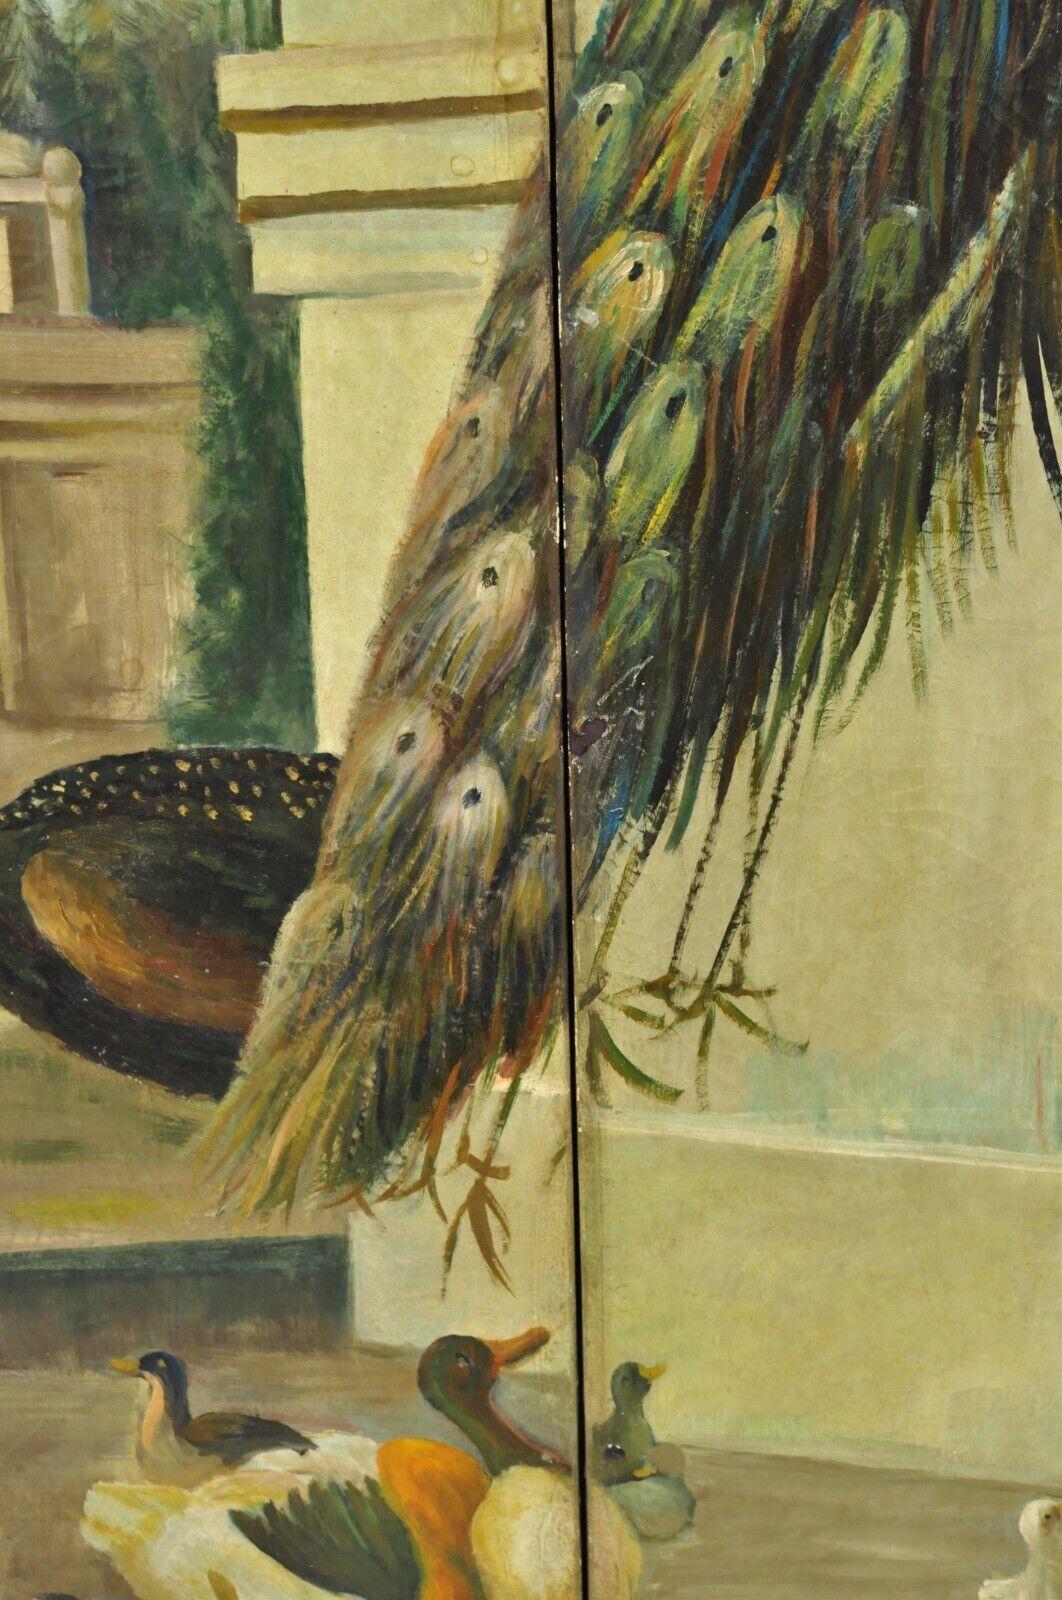 Venetian Hand Painted Oil on Canvas 4 Section Peacock Bird Screen Room Divider 2